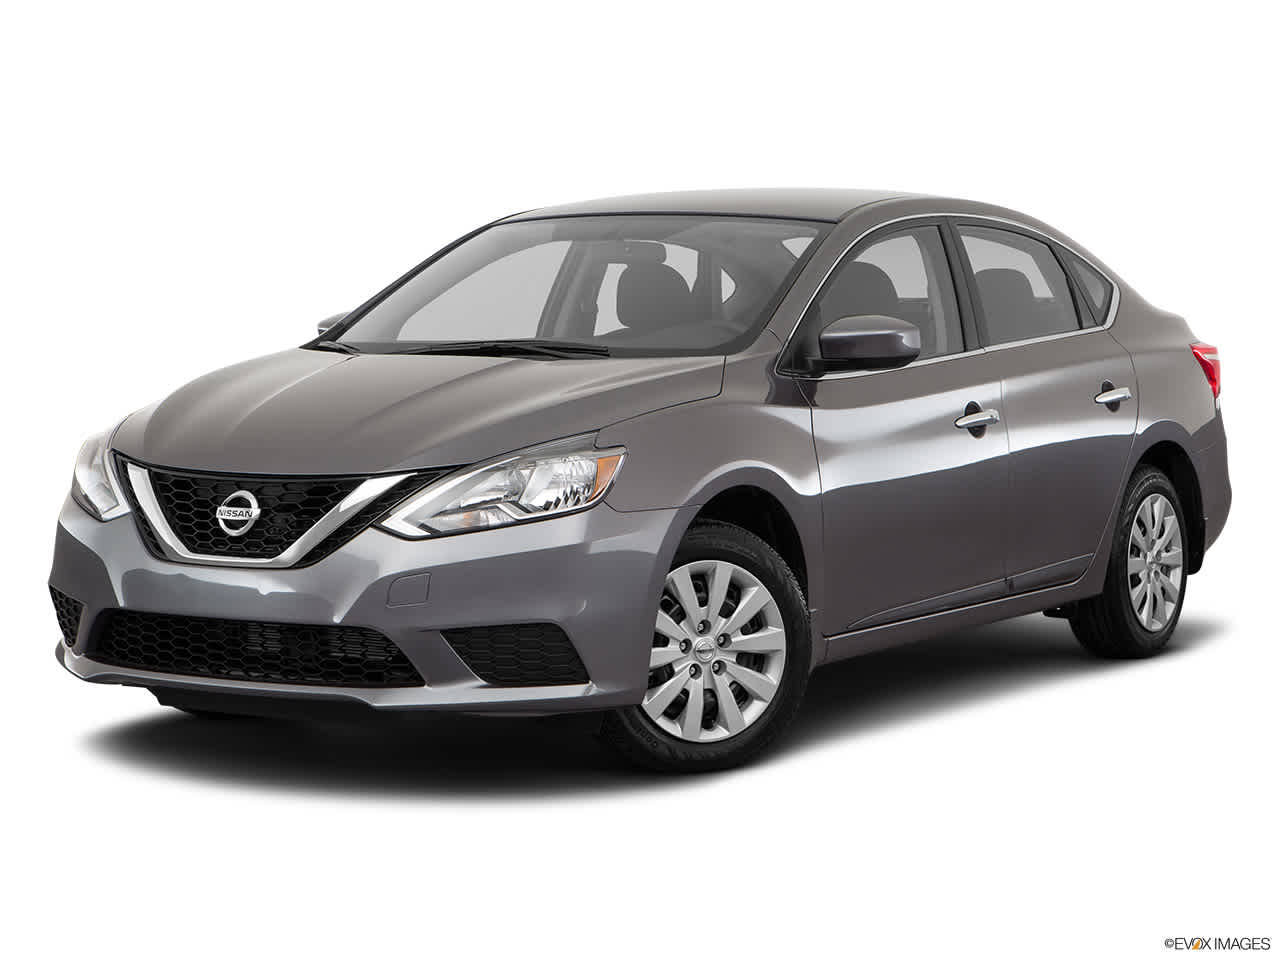 Used 2017 Nissan Sentra SV with VIN 3N1AB7AP6HY345329 for sale in Ames, IA